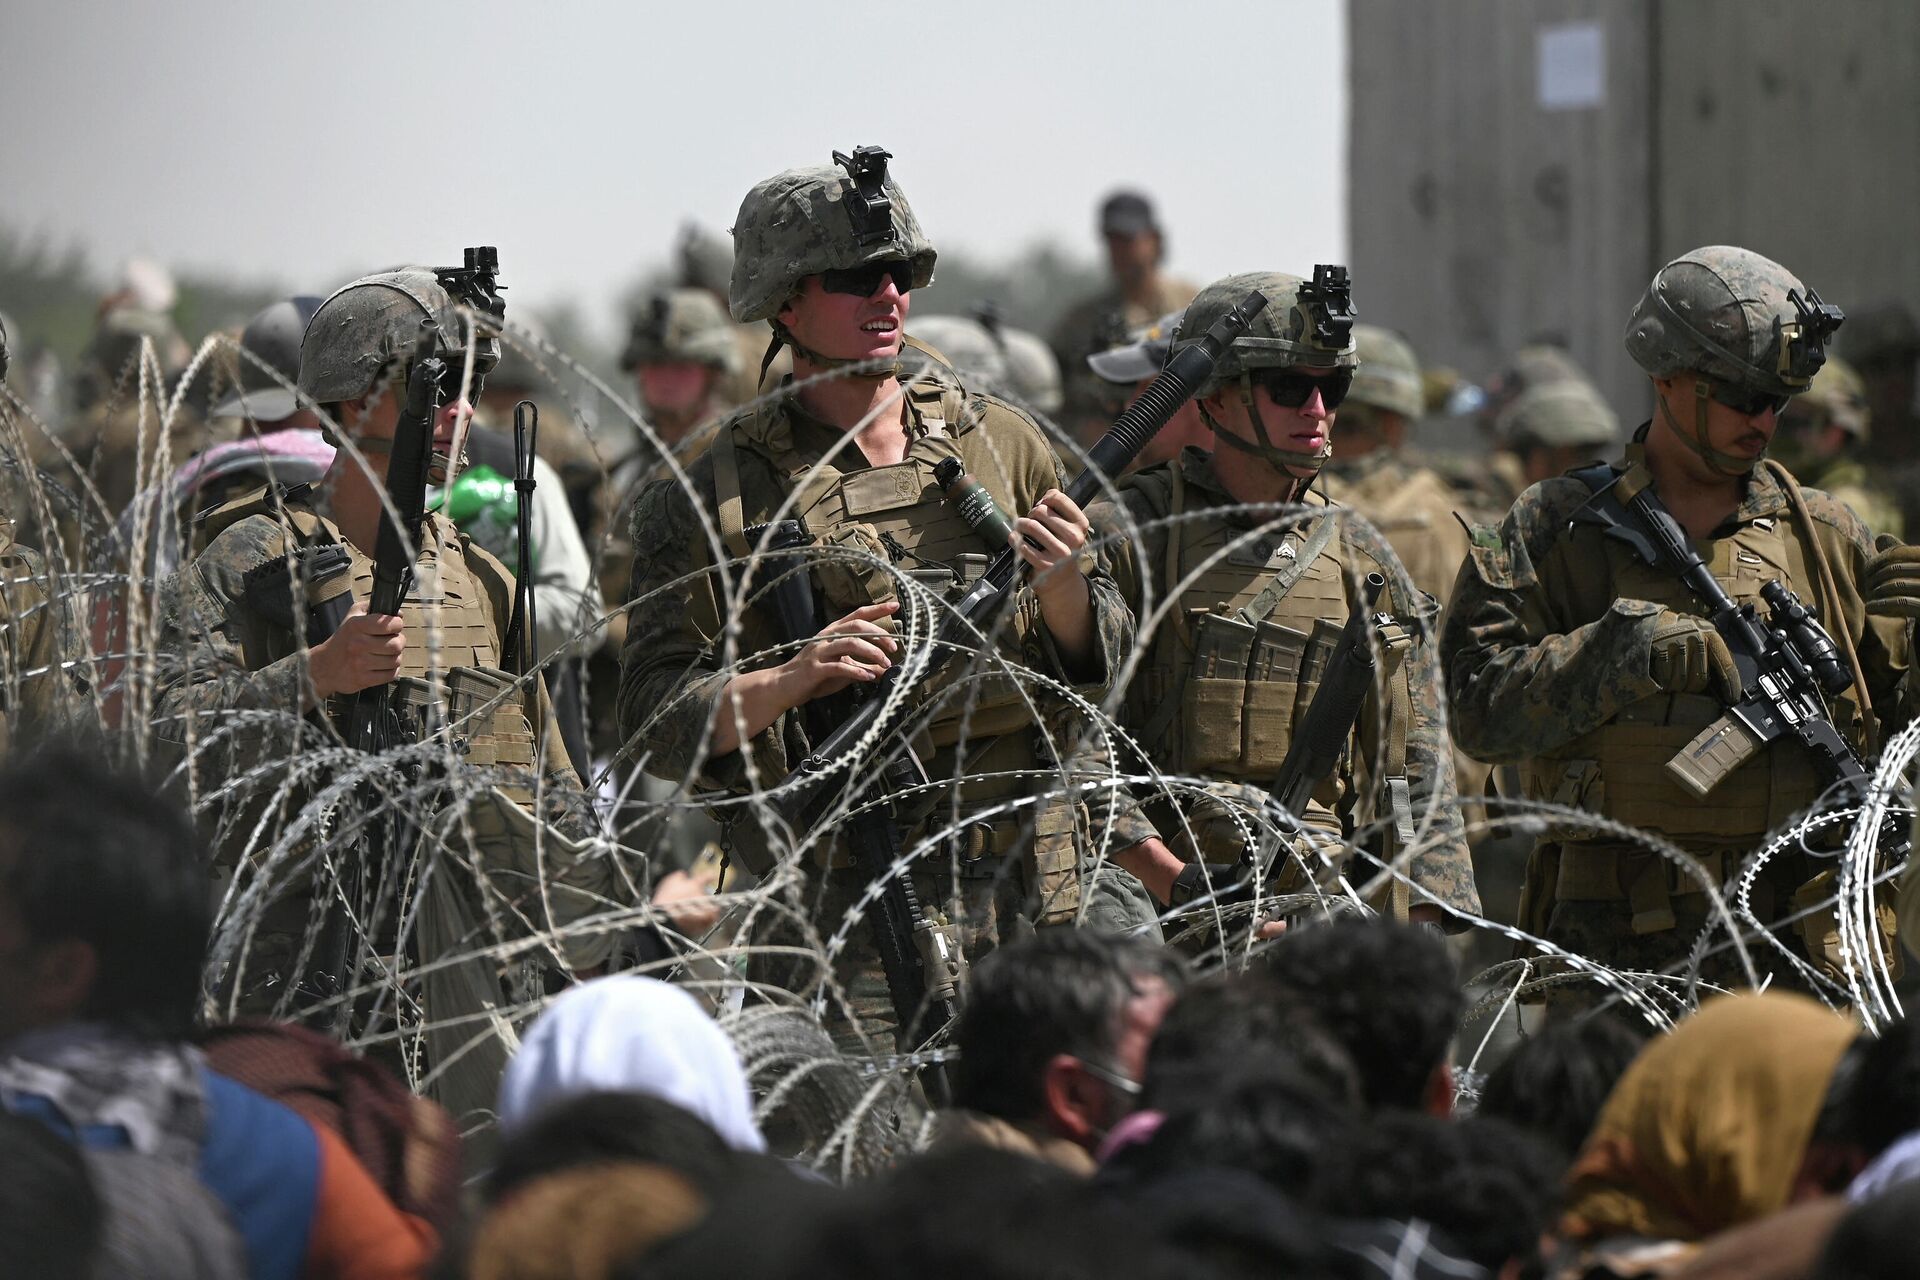 US soldiers stand guard behind barbed wire as Afghans sit on a roadside near the military part of the airport in Kabul on August 20, 2021, hoping to flee from the country after the Taliban's military takeover of Afghanistan - Sputnik International, 1920, 22.09.2021